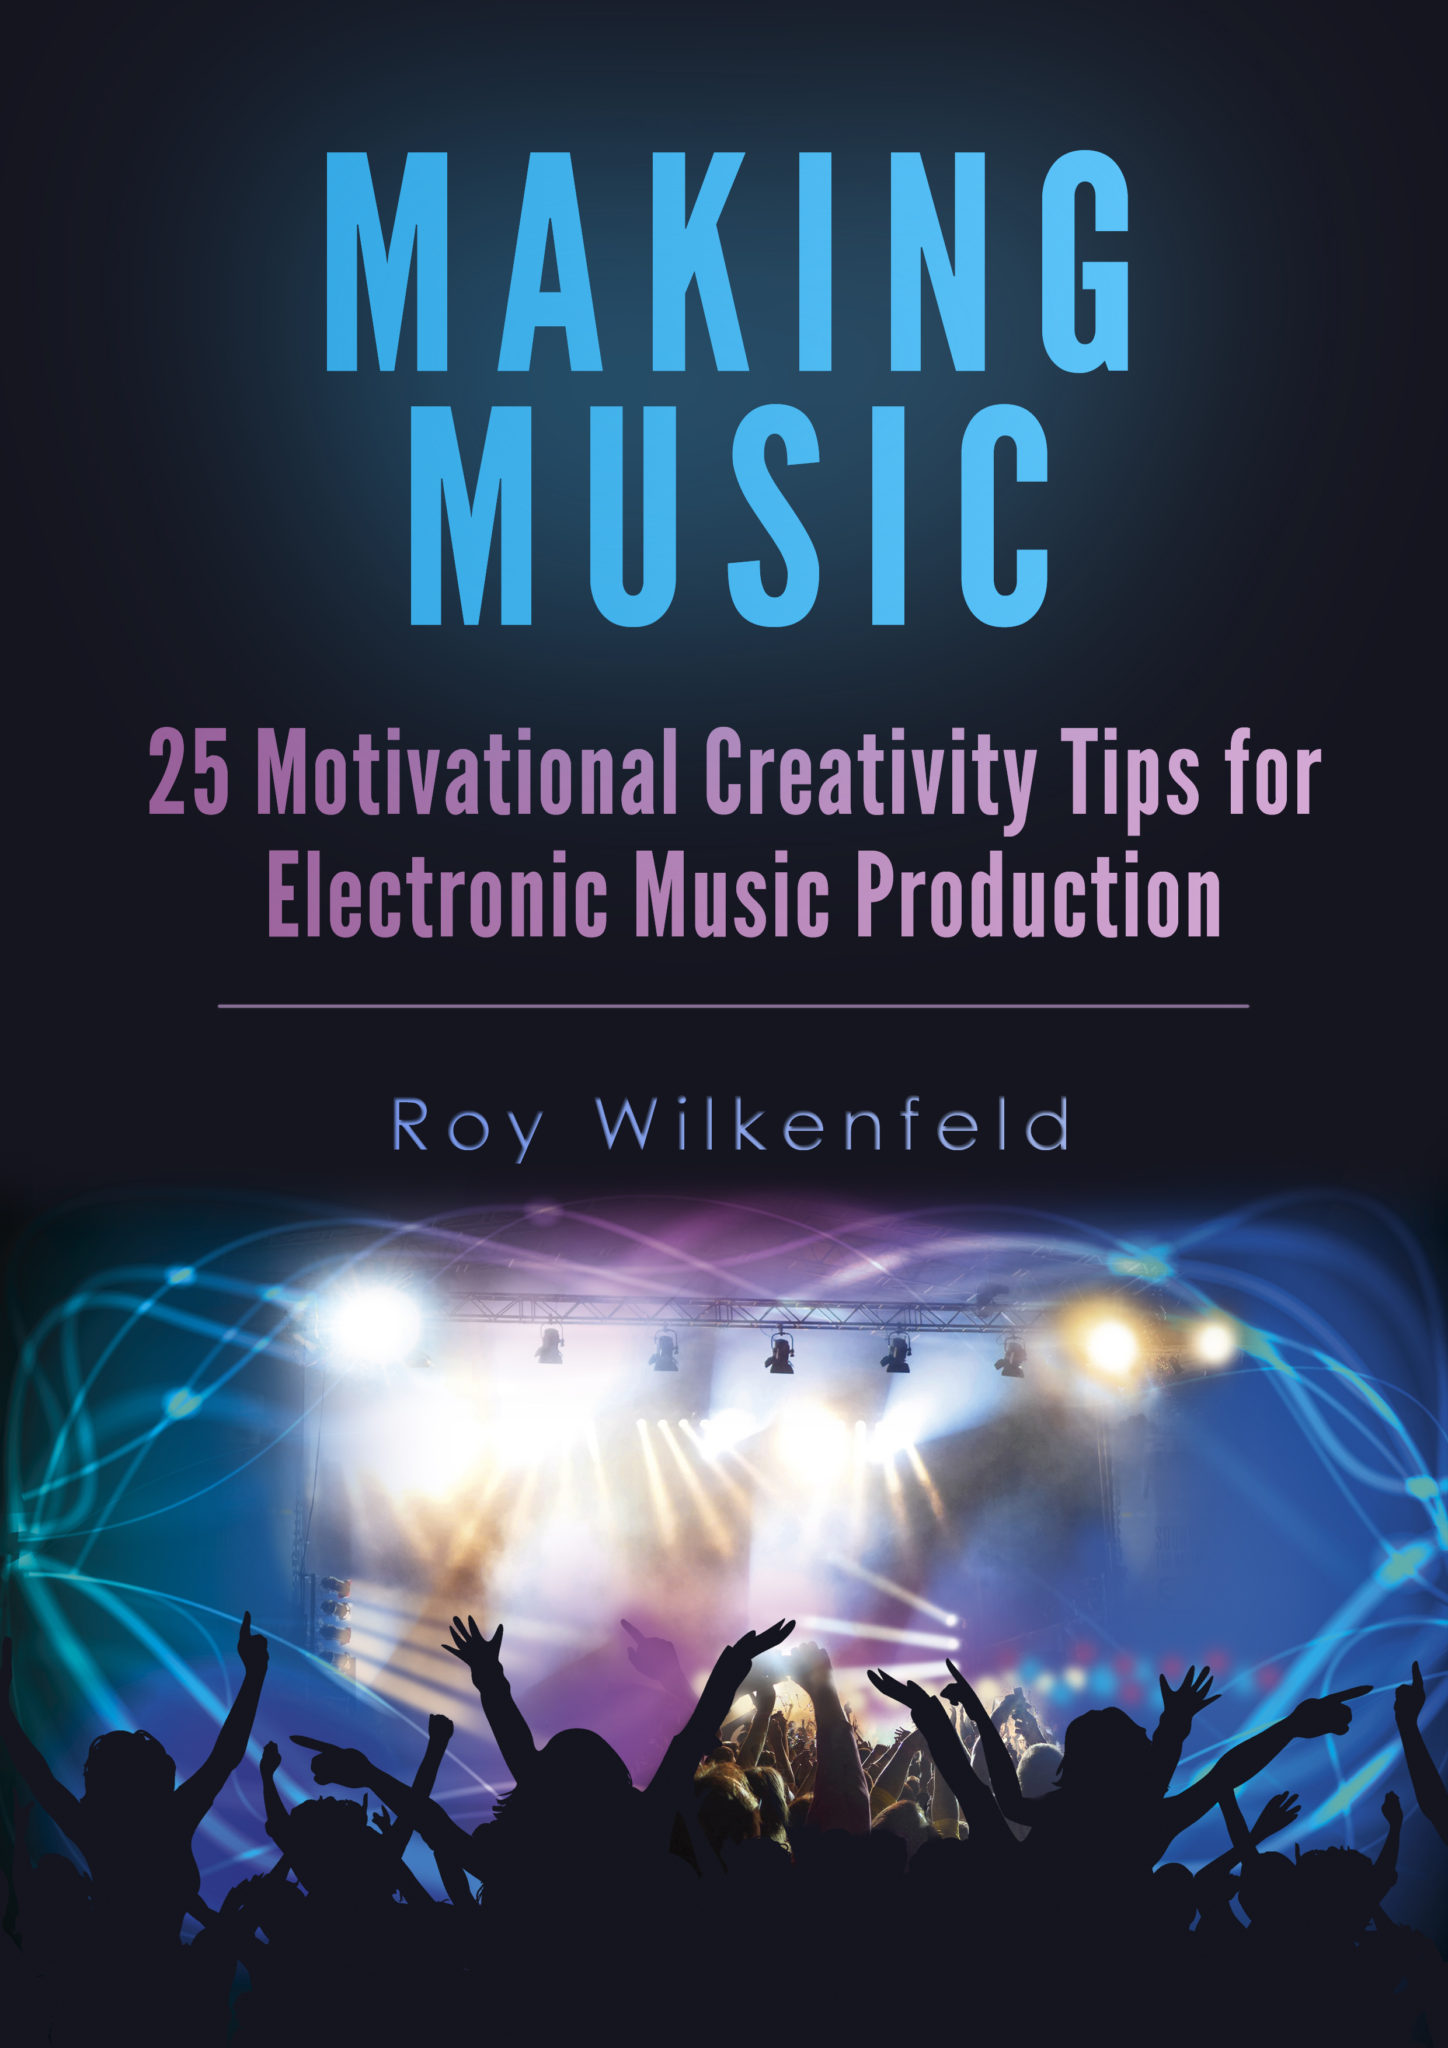 FREE: Making Music: 25 Motivational Creativity Tips for Electronic Music Production by Roy Wilkenfeld